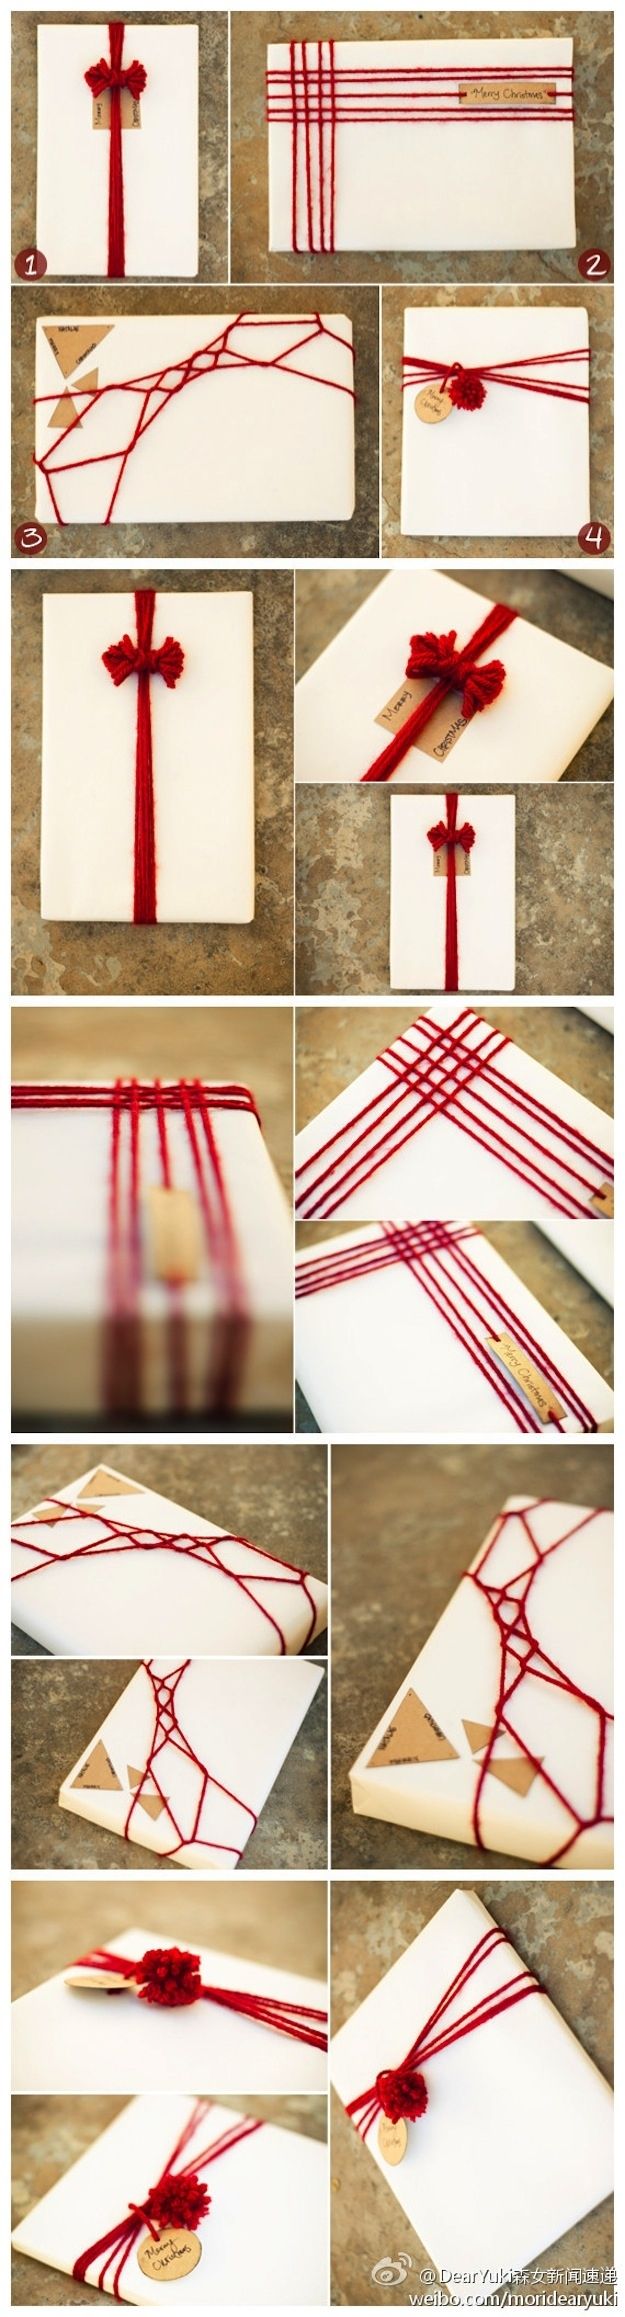 Try These 30 Simple String Projects Now-homesthetics (7)